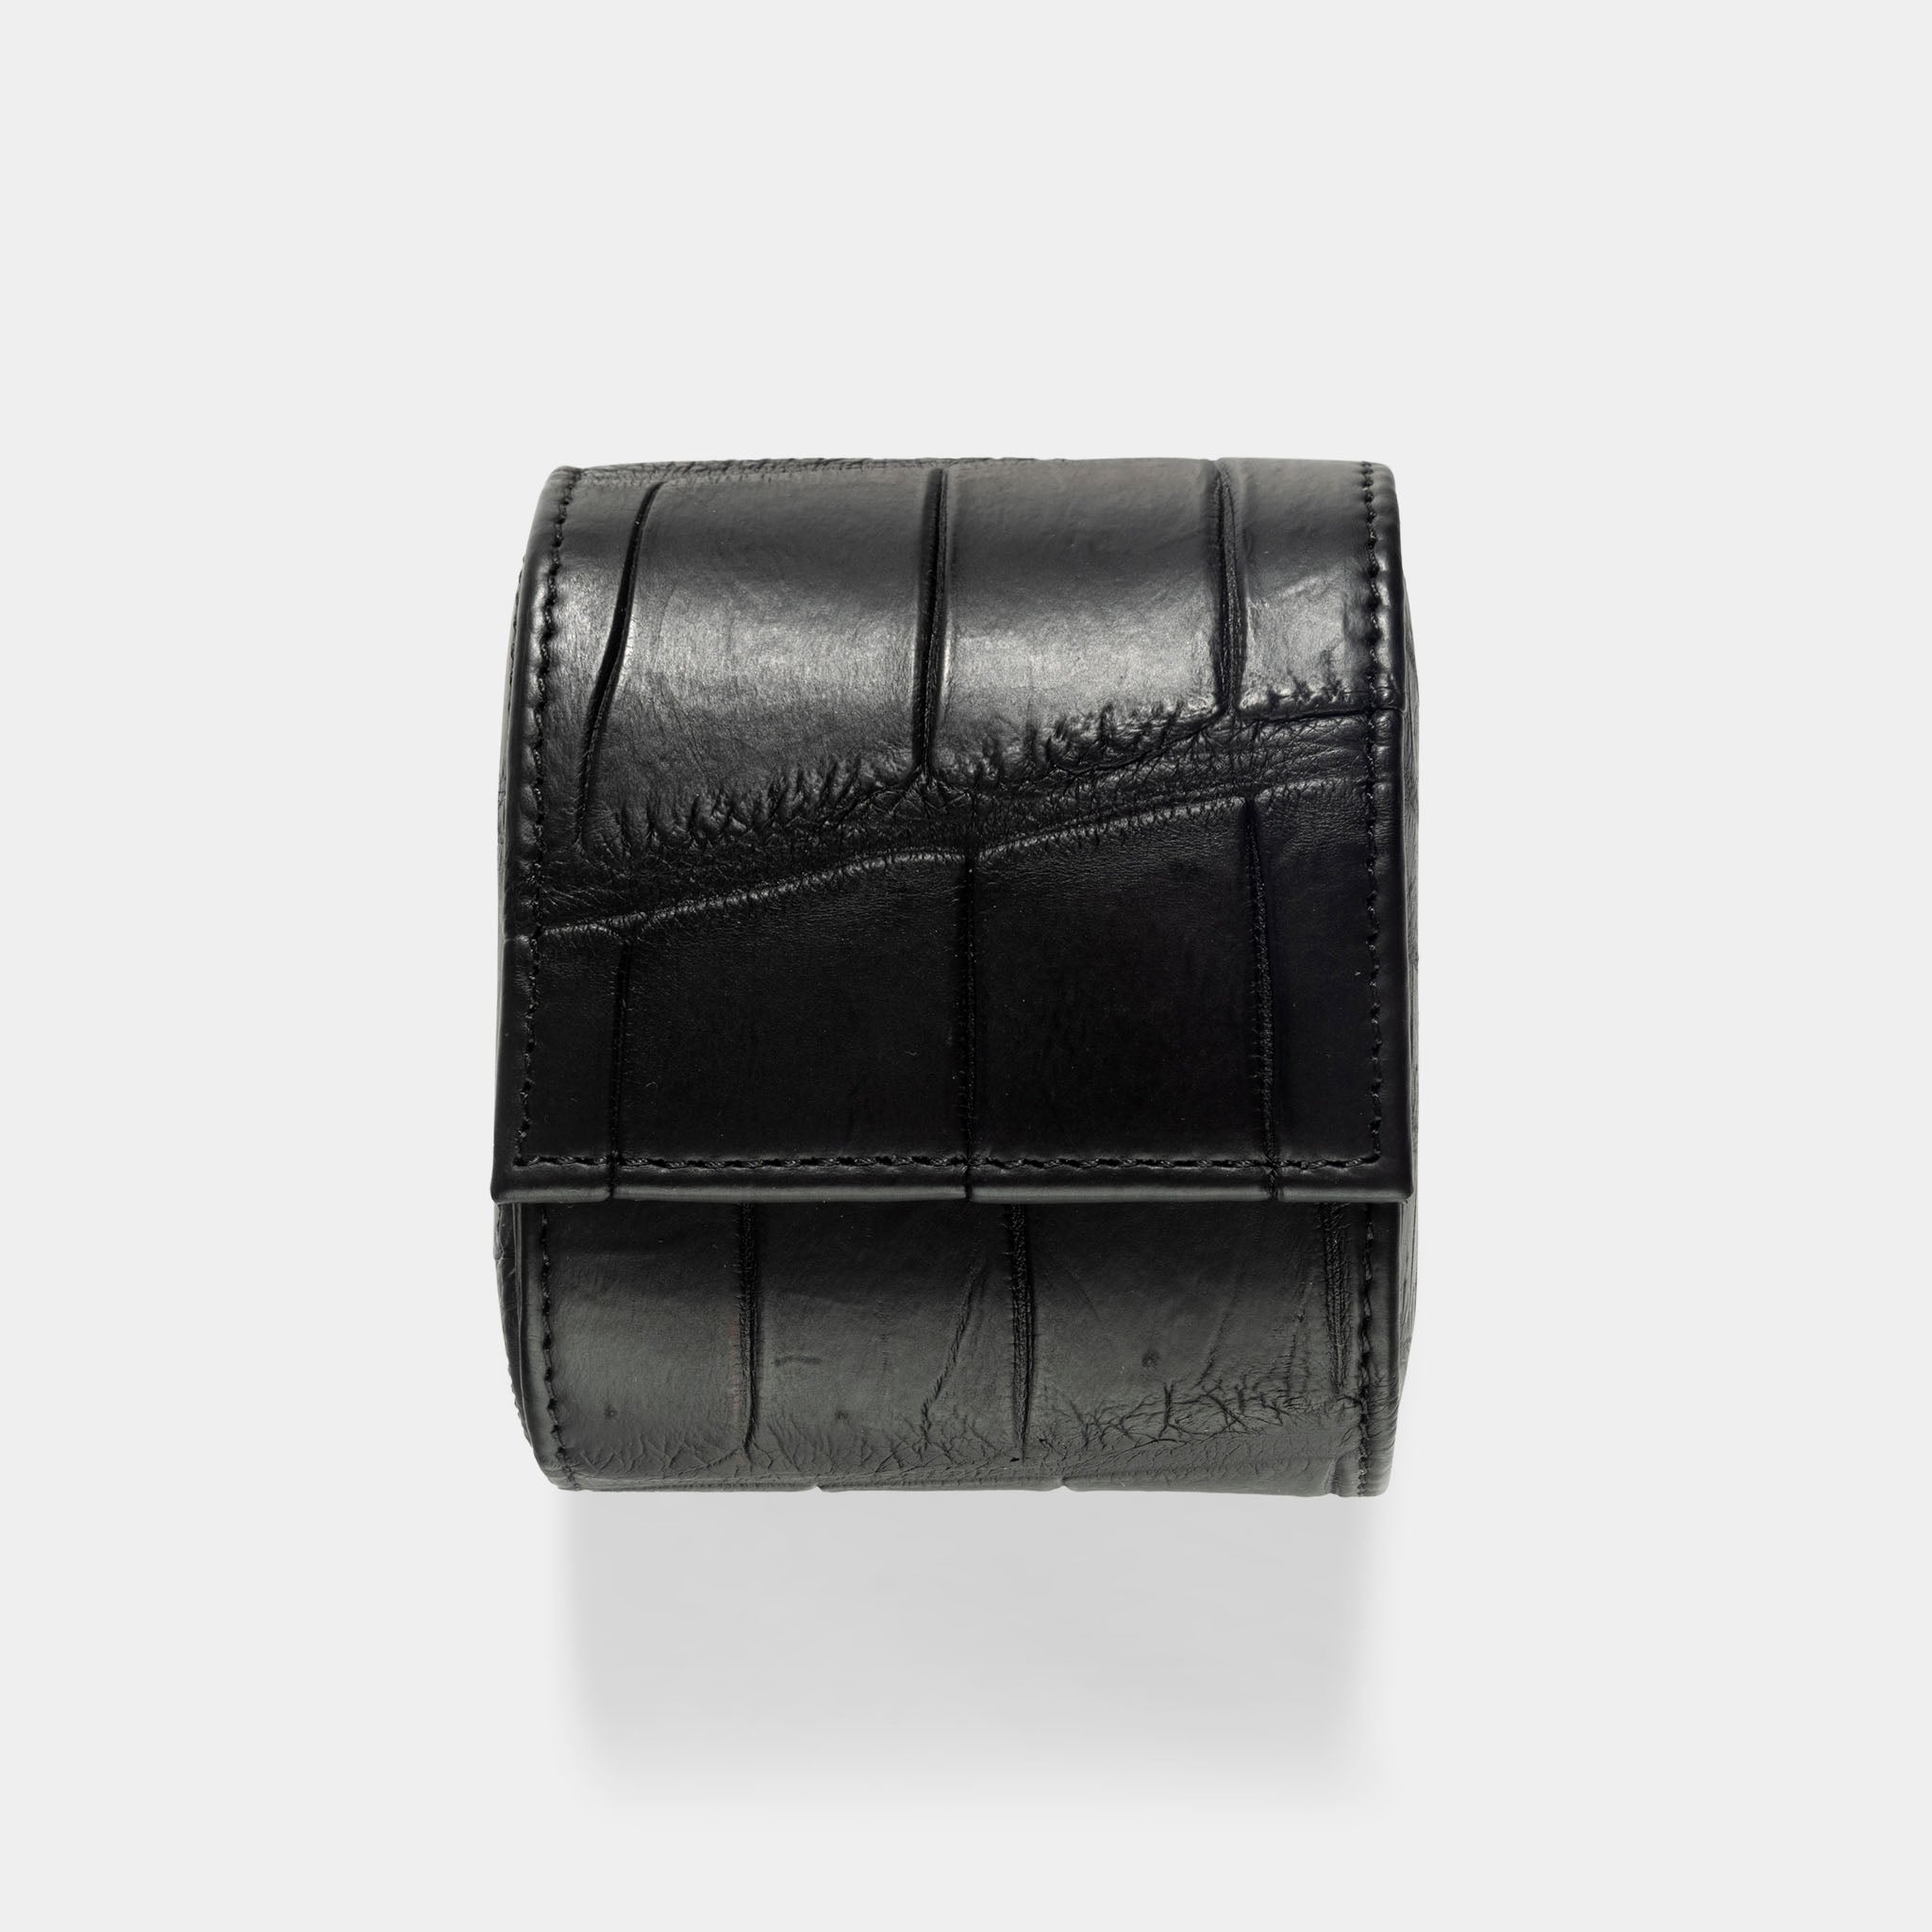 Oval_Finest_Black_Alligator_Leather_Watch_Box_For_Rolex_Watches